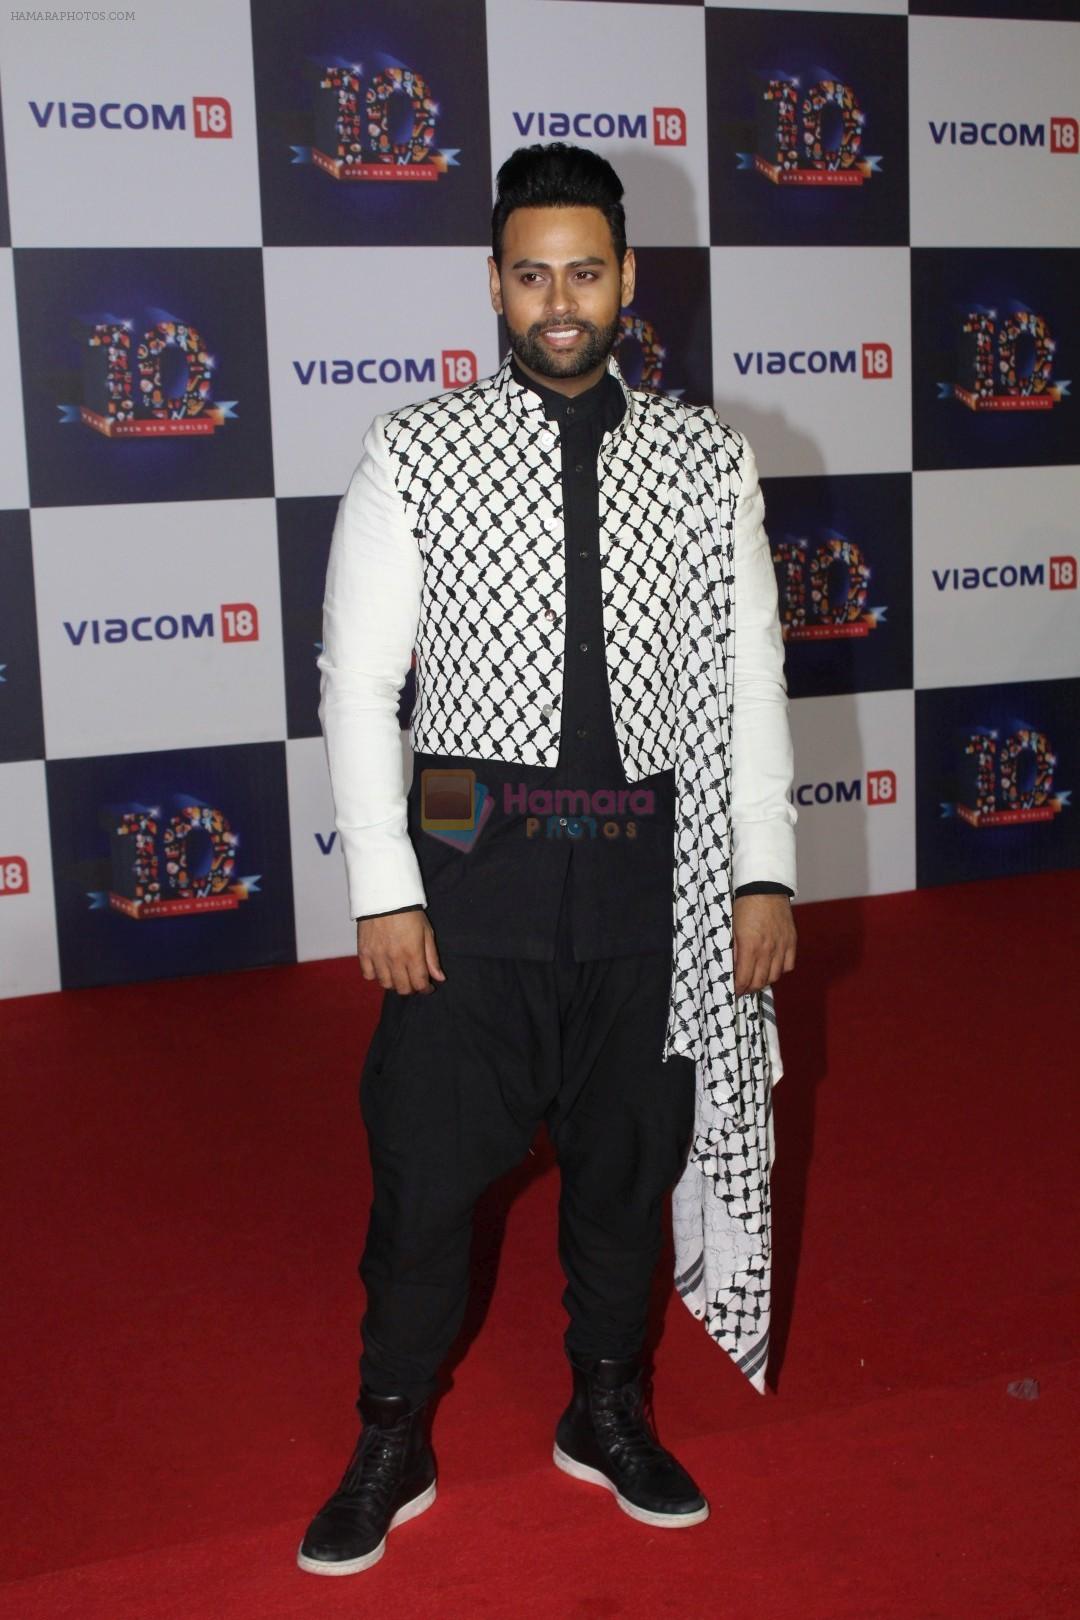 Andy at The Red Carpet Of Viacom18 10yrs Anniversary on 17th Nov 2017